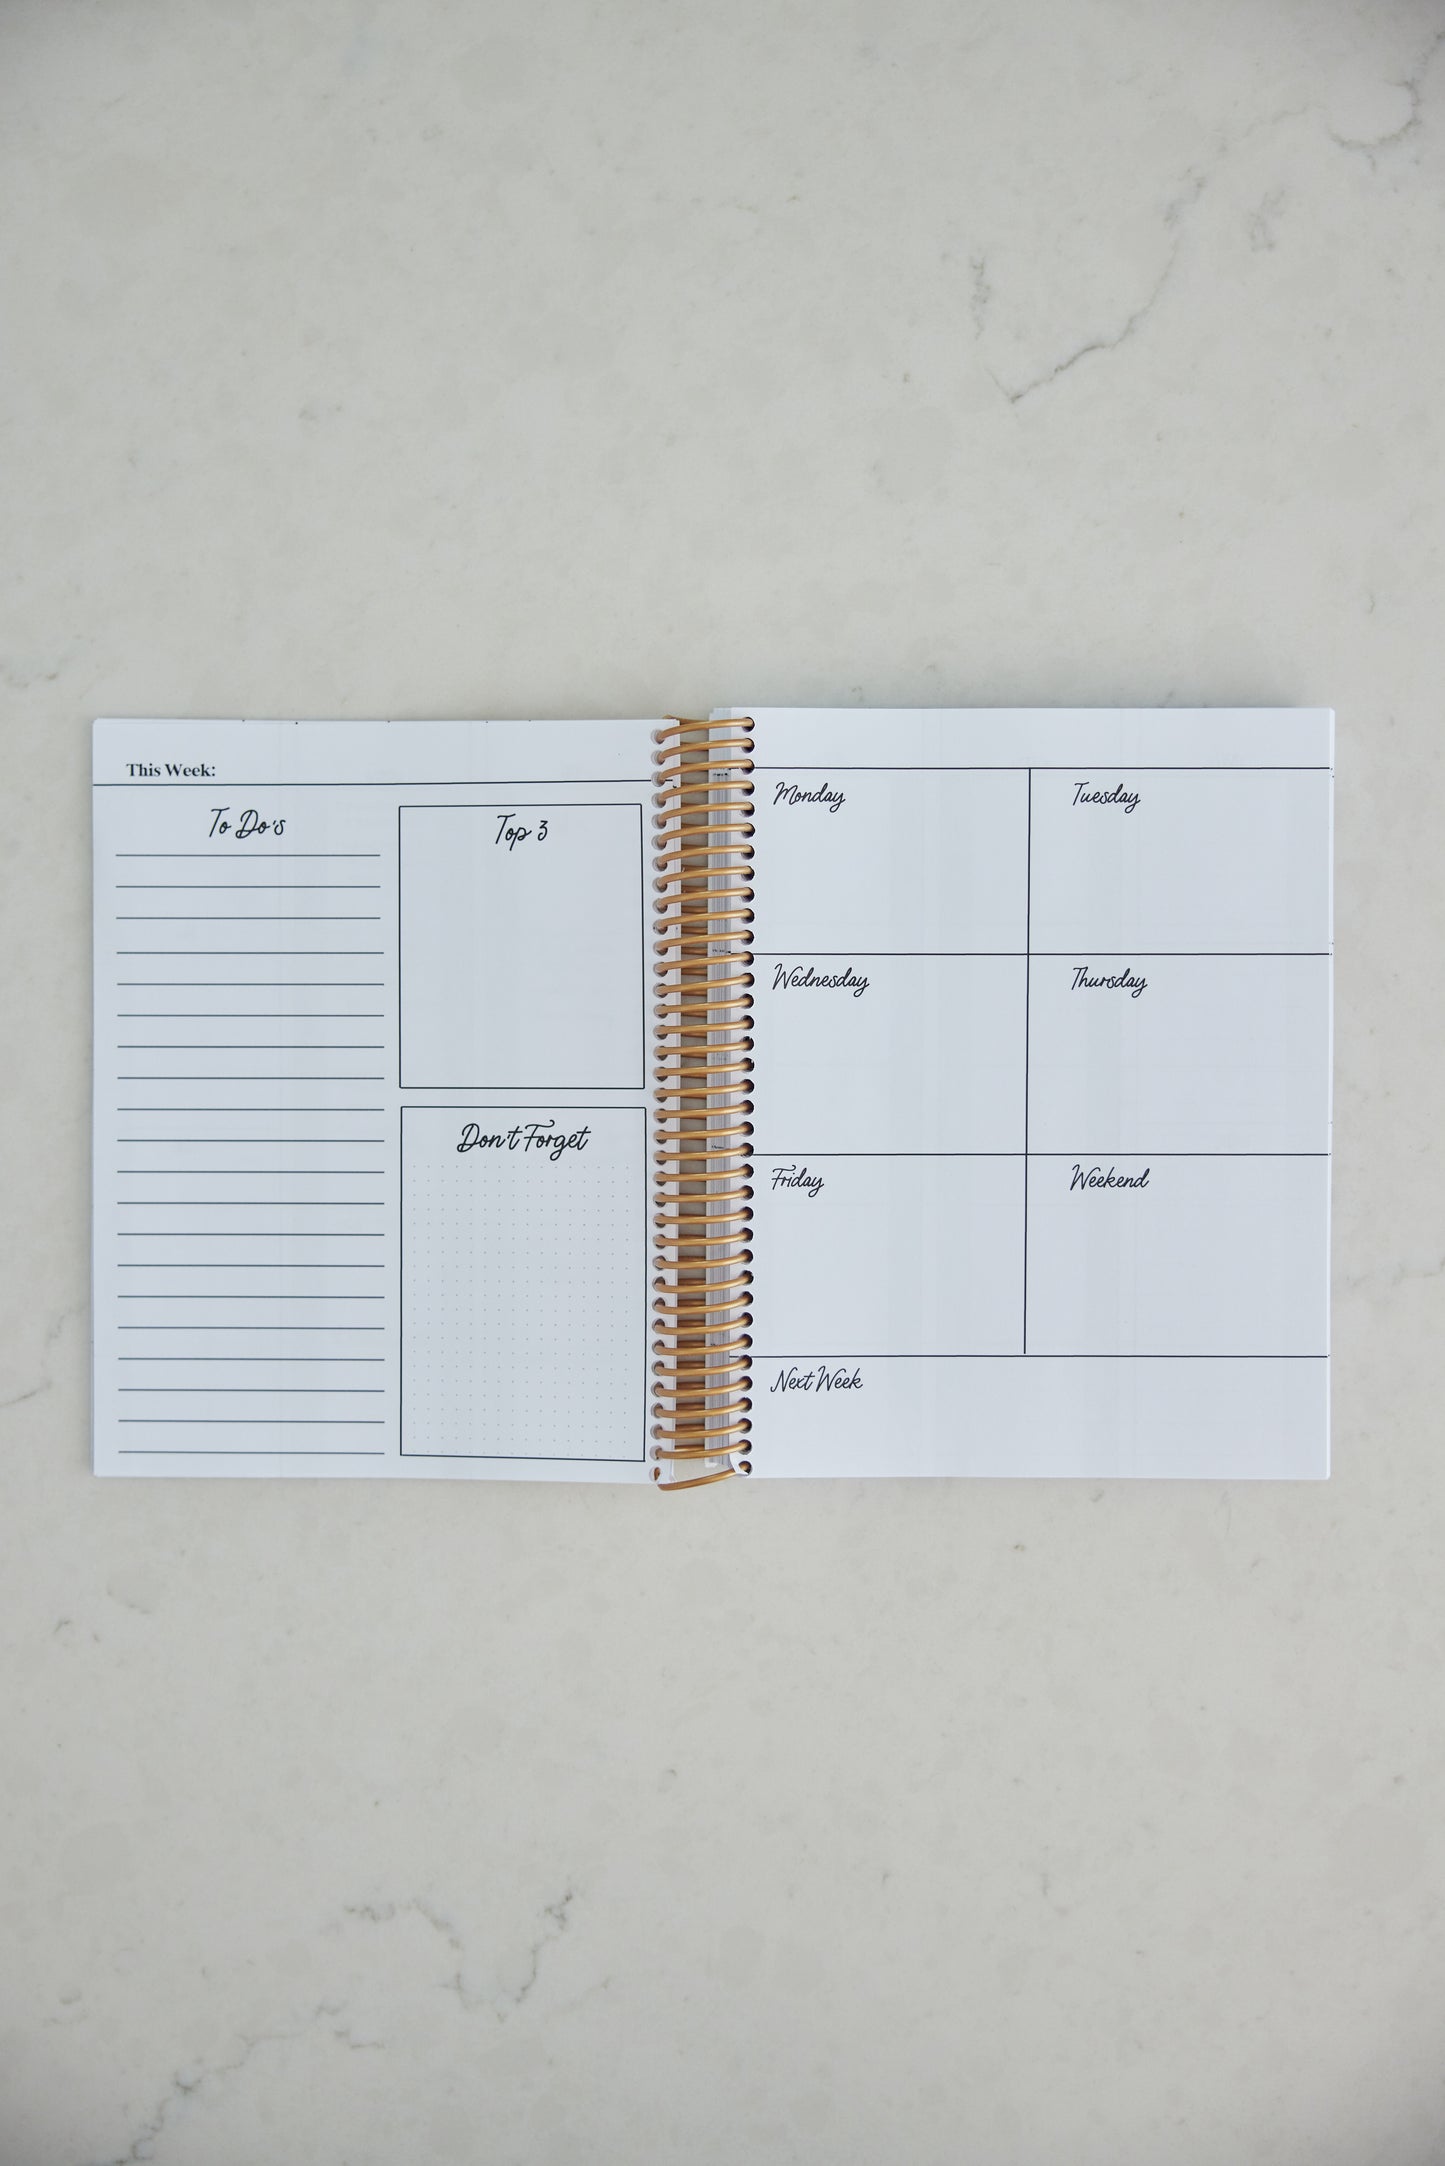 Caffeinate & Conquer™ Weekly Planner